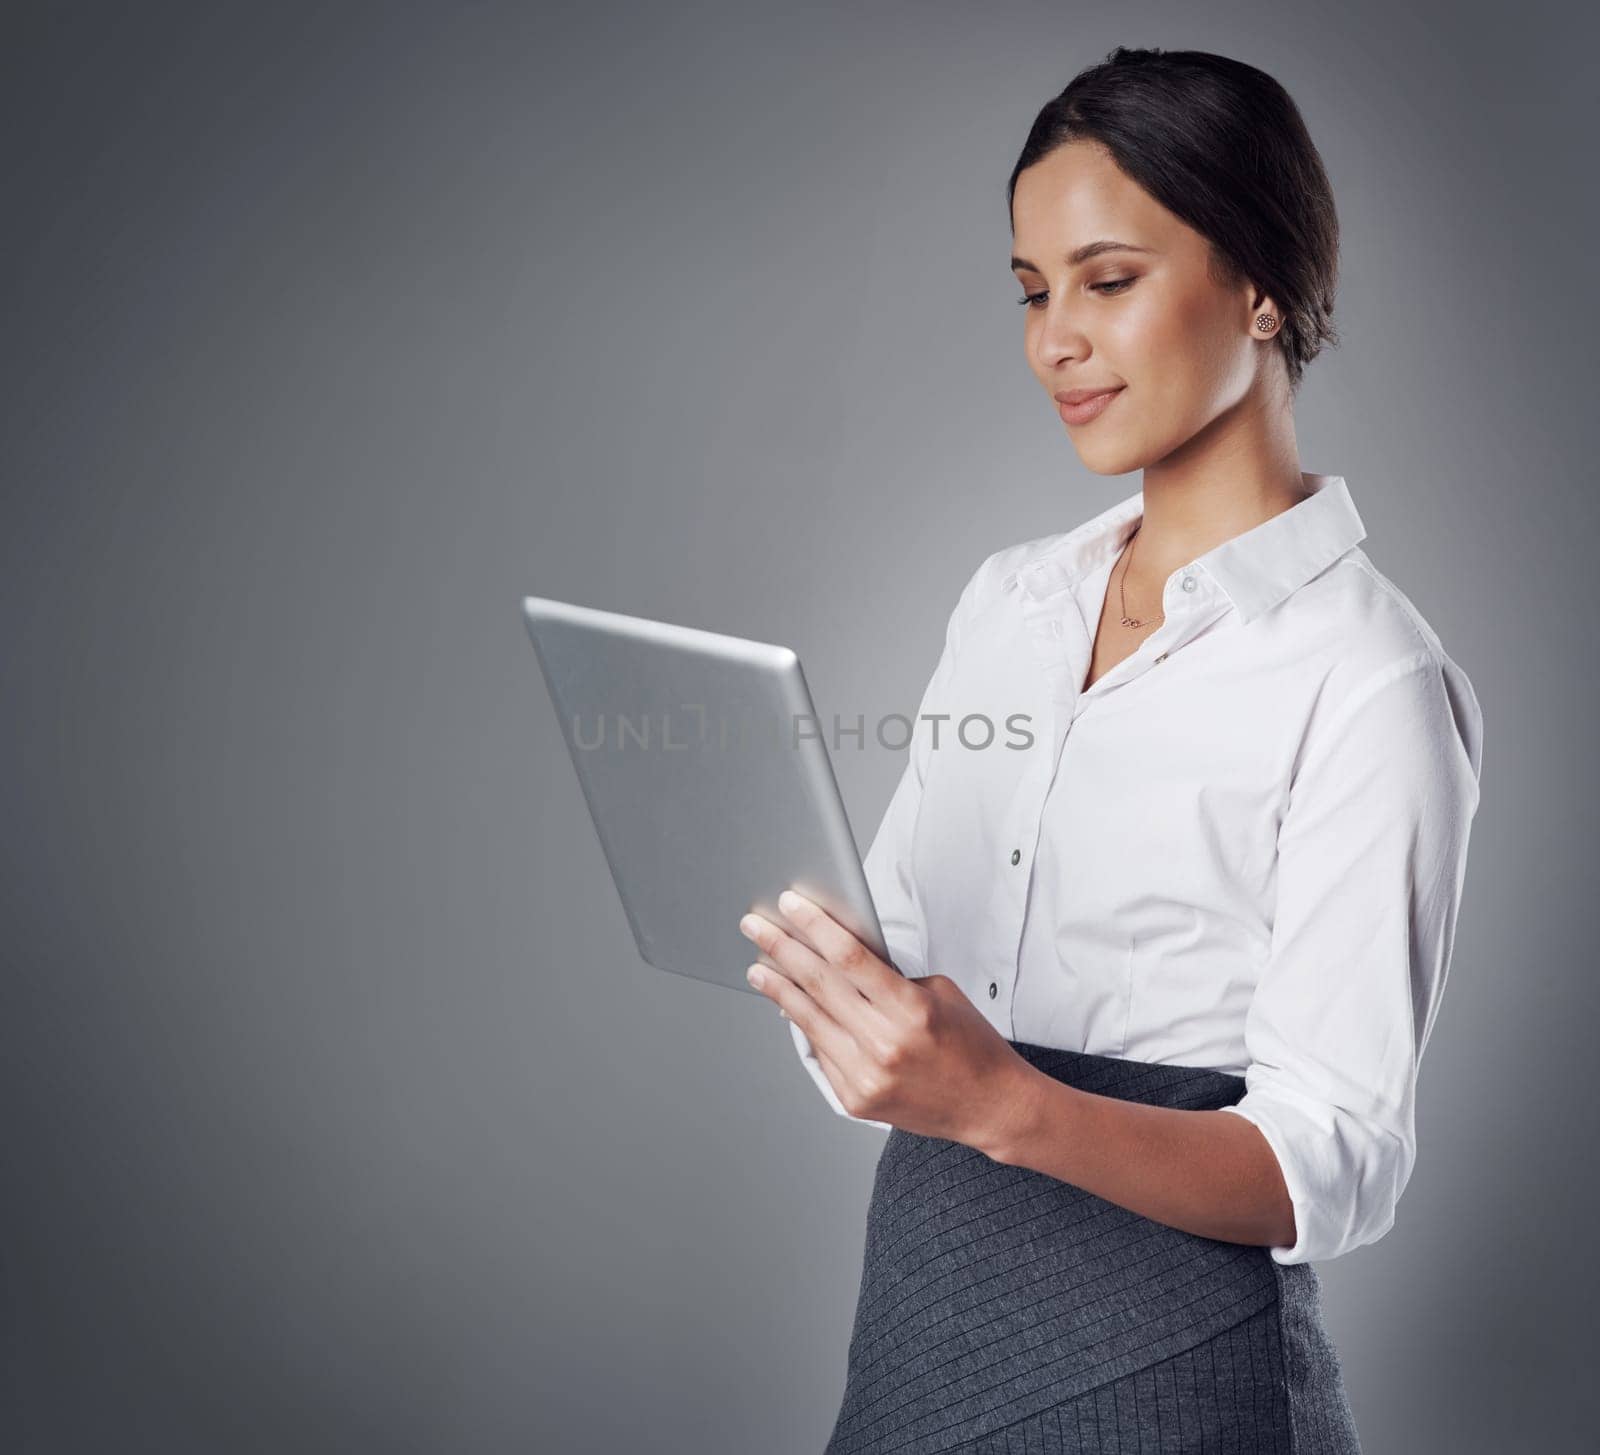 Keeping up with competitive business using cutting edge technology. Studio shot of a young businesswoman using a digital tablet against a gray background